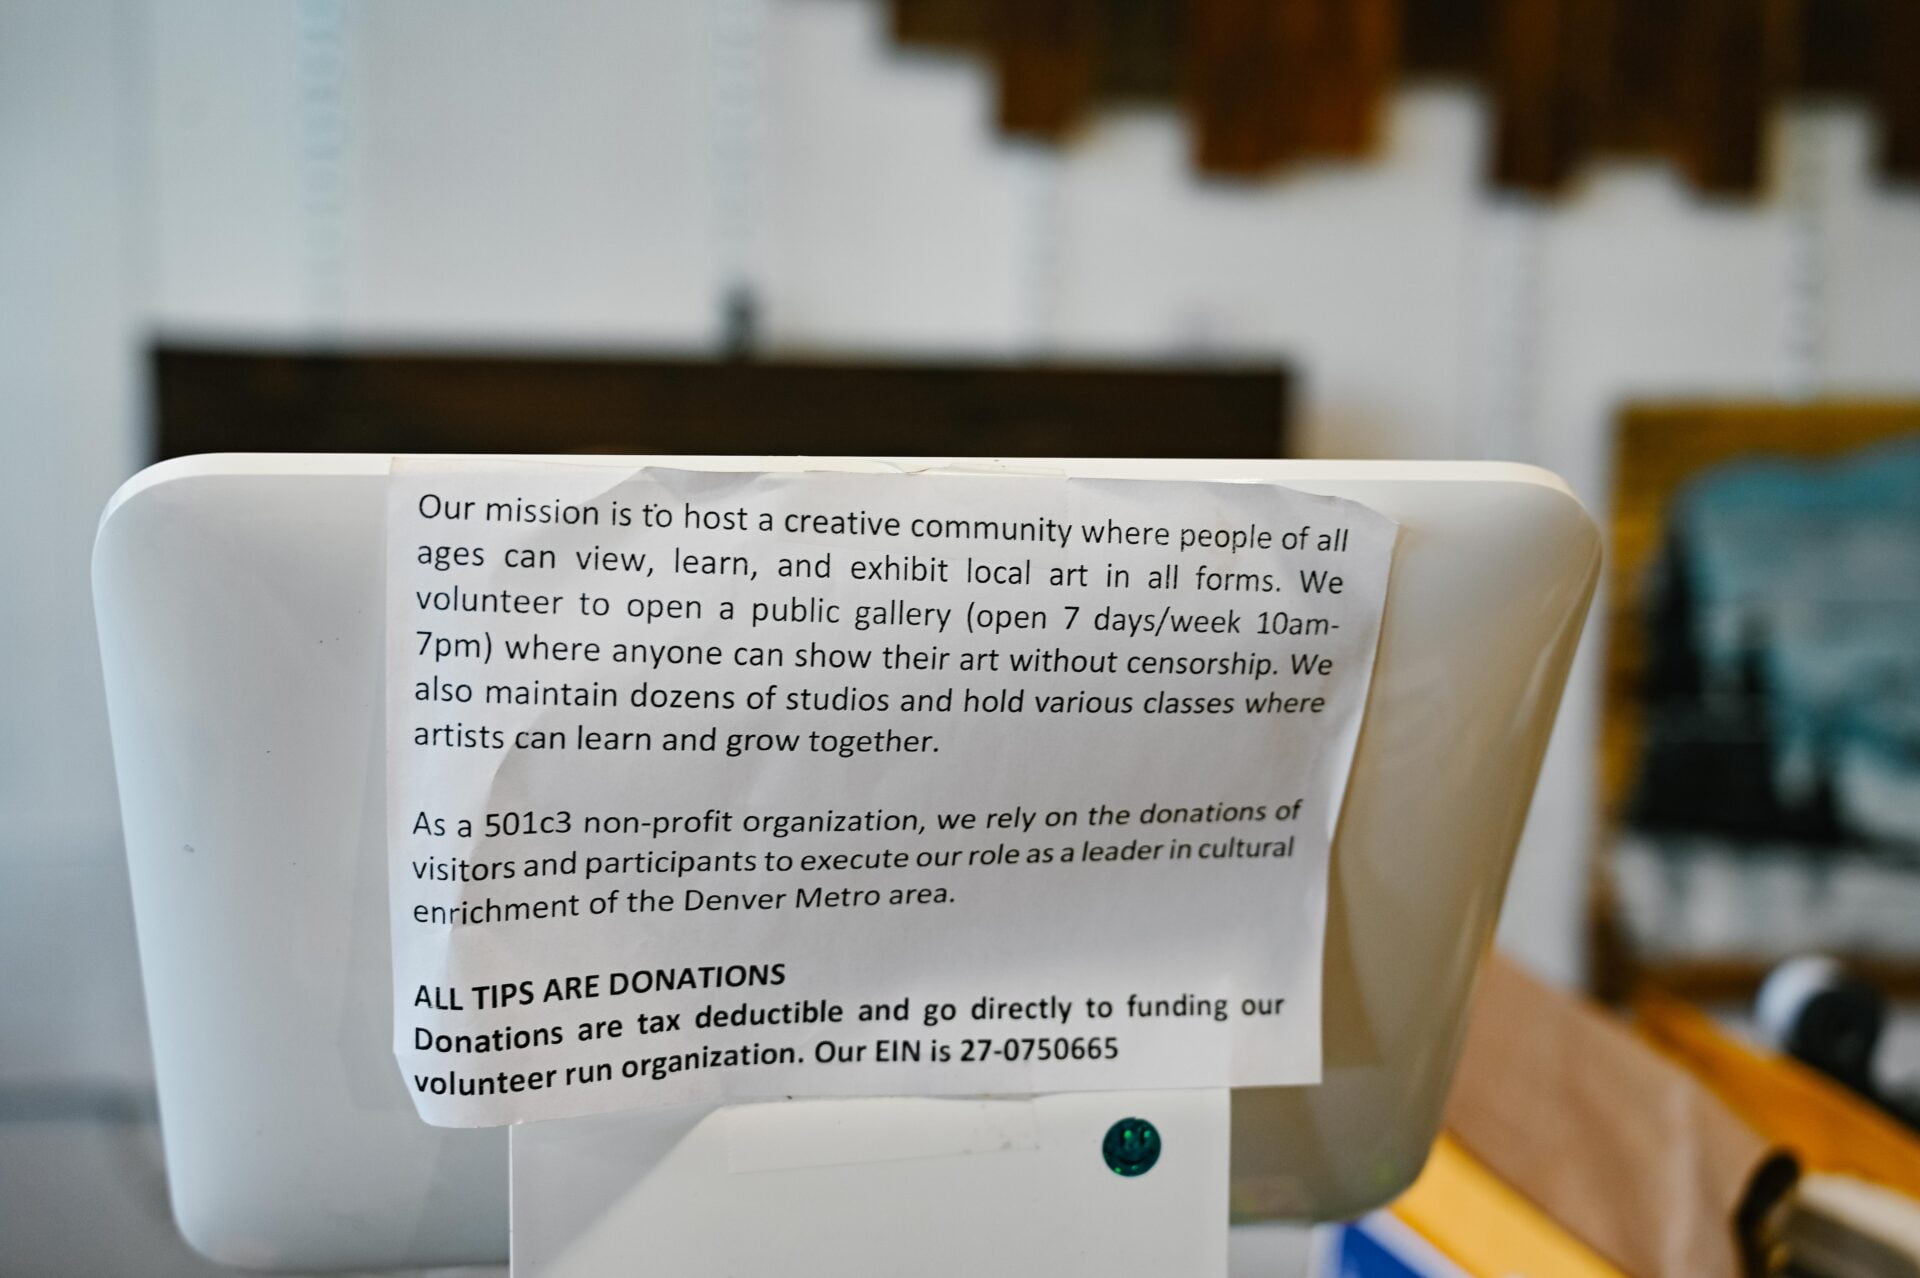 printed sign on the back of the cash register talking about the mission and details of the Denver Art Society